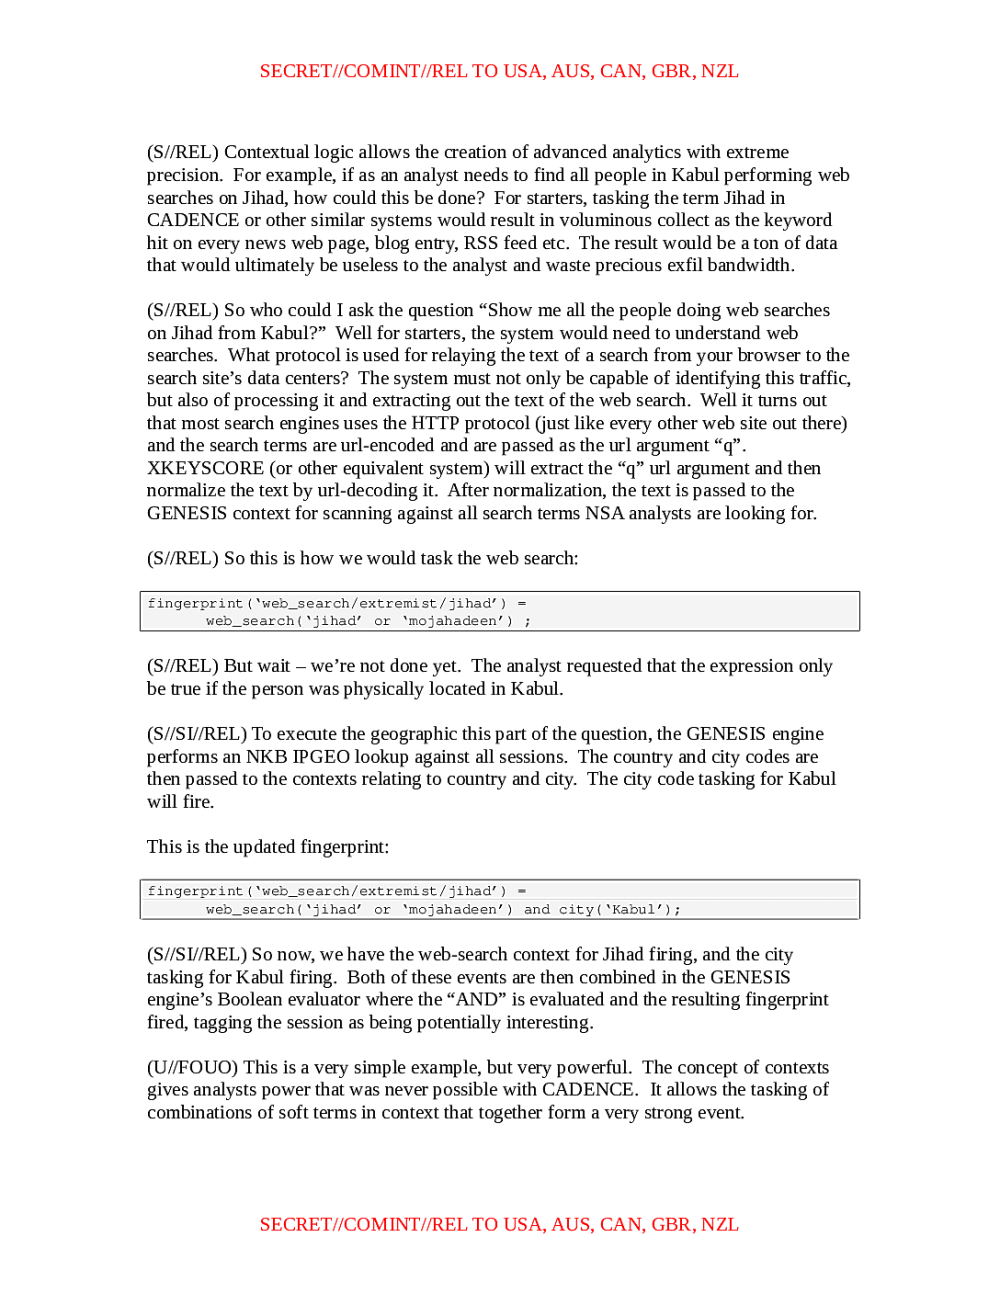 Page 2 from Guide to Using Contexts in XKS Fingerprints